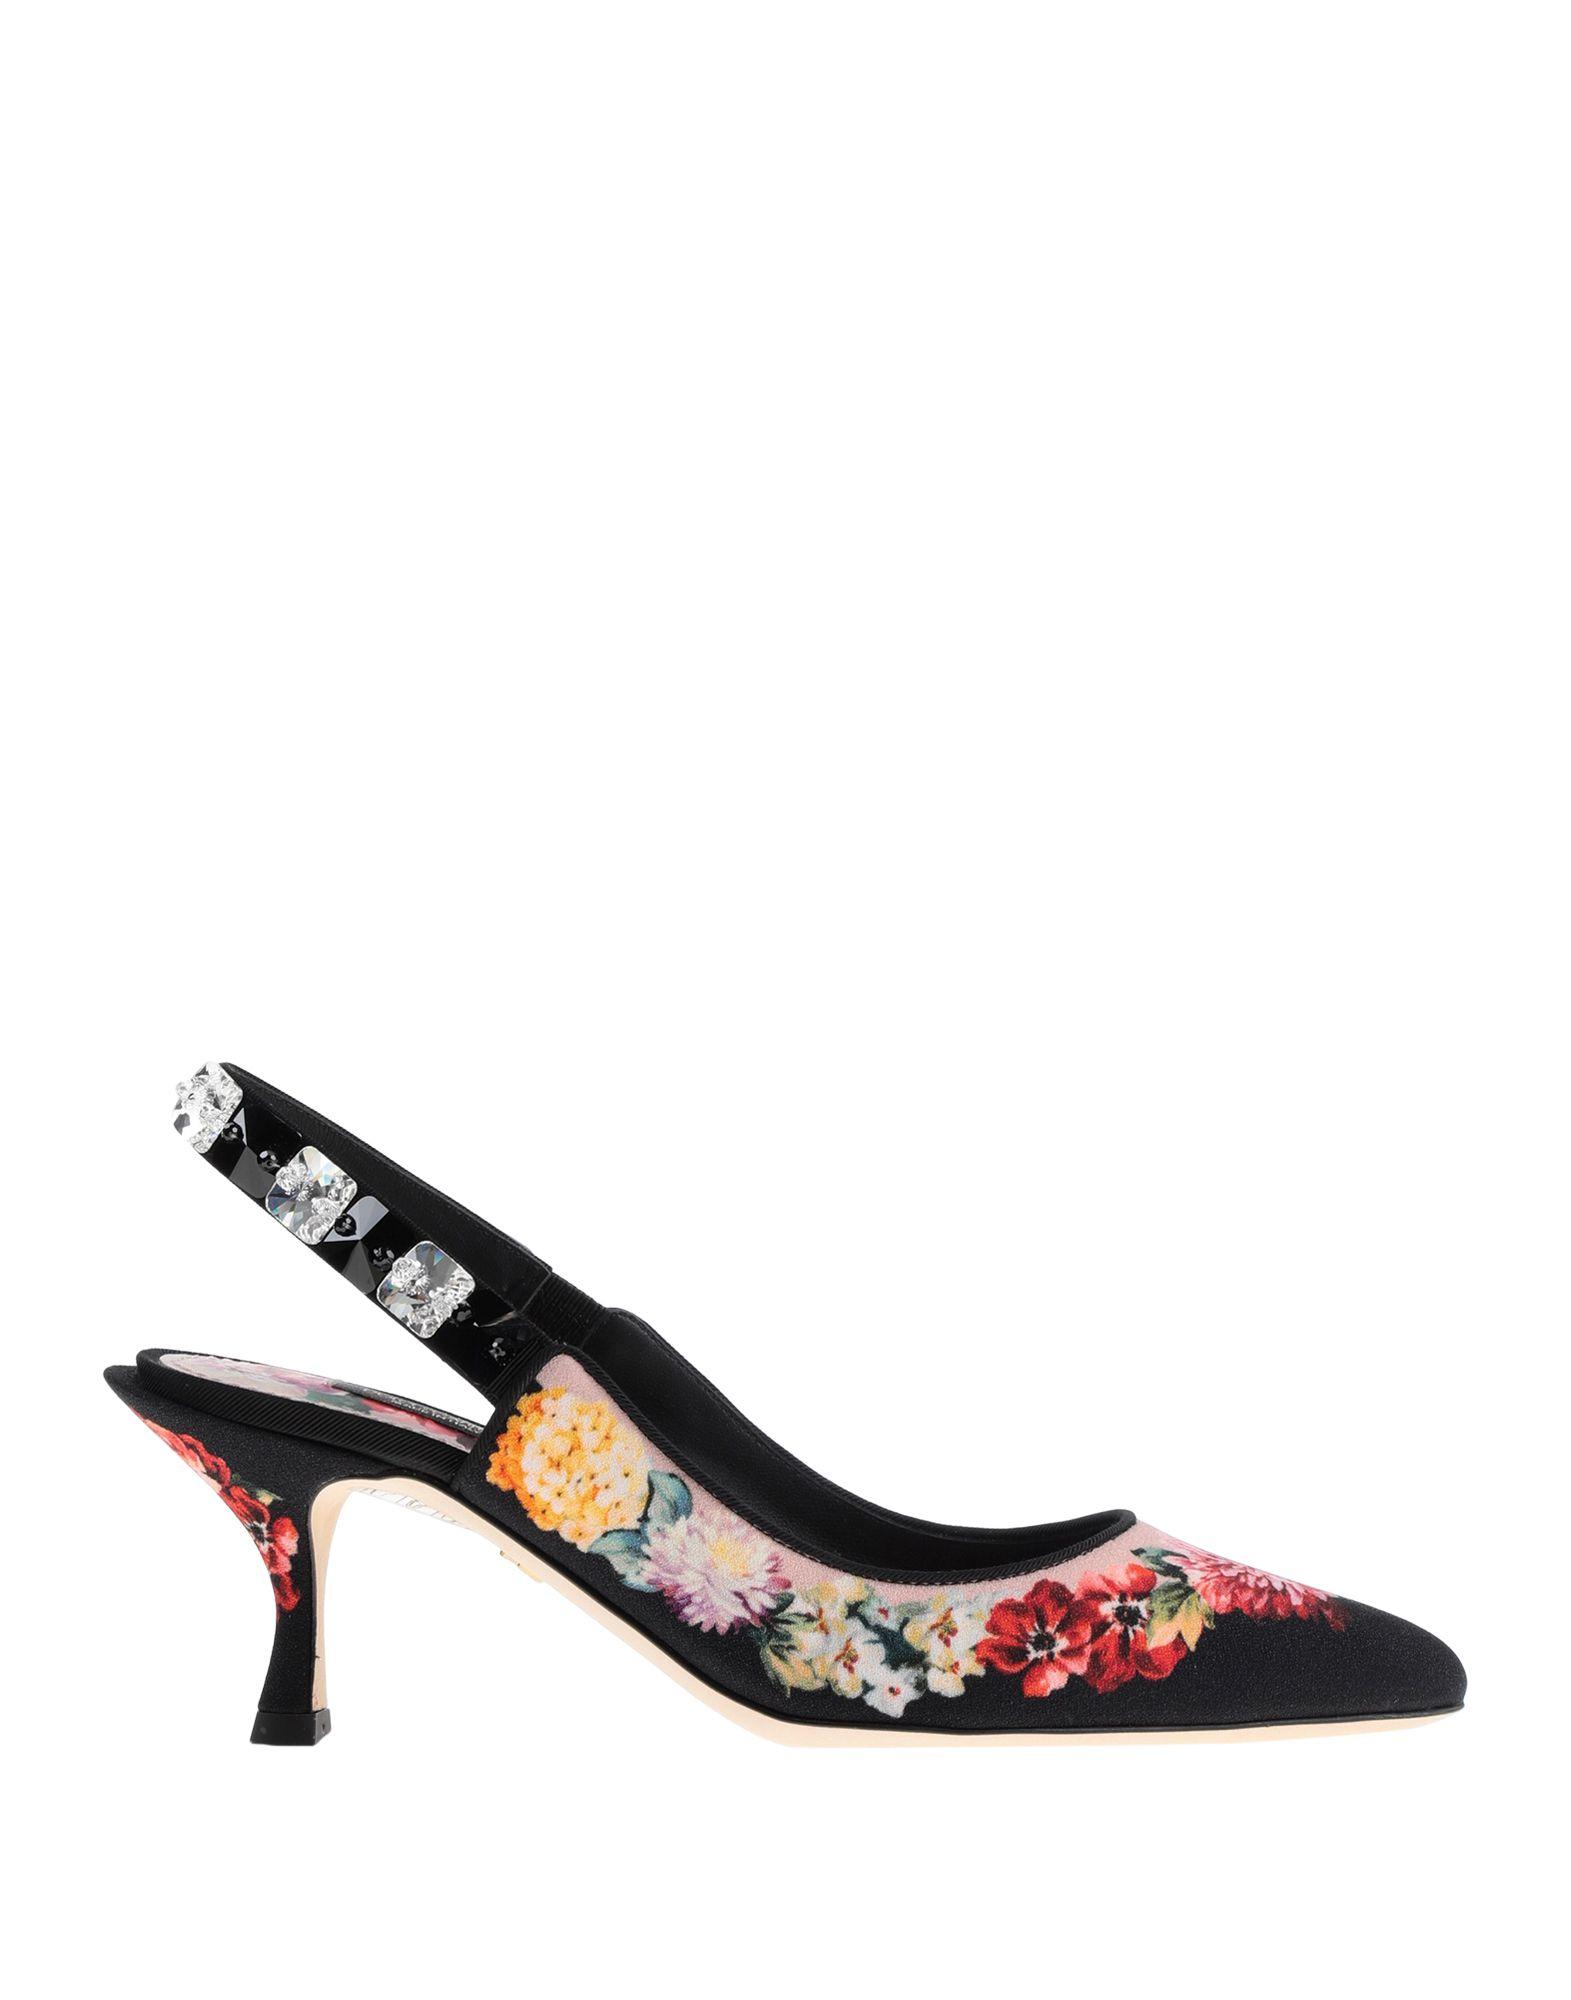 Dolce & Gabbana Leather Mules in Pink - Lyst